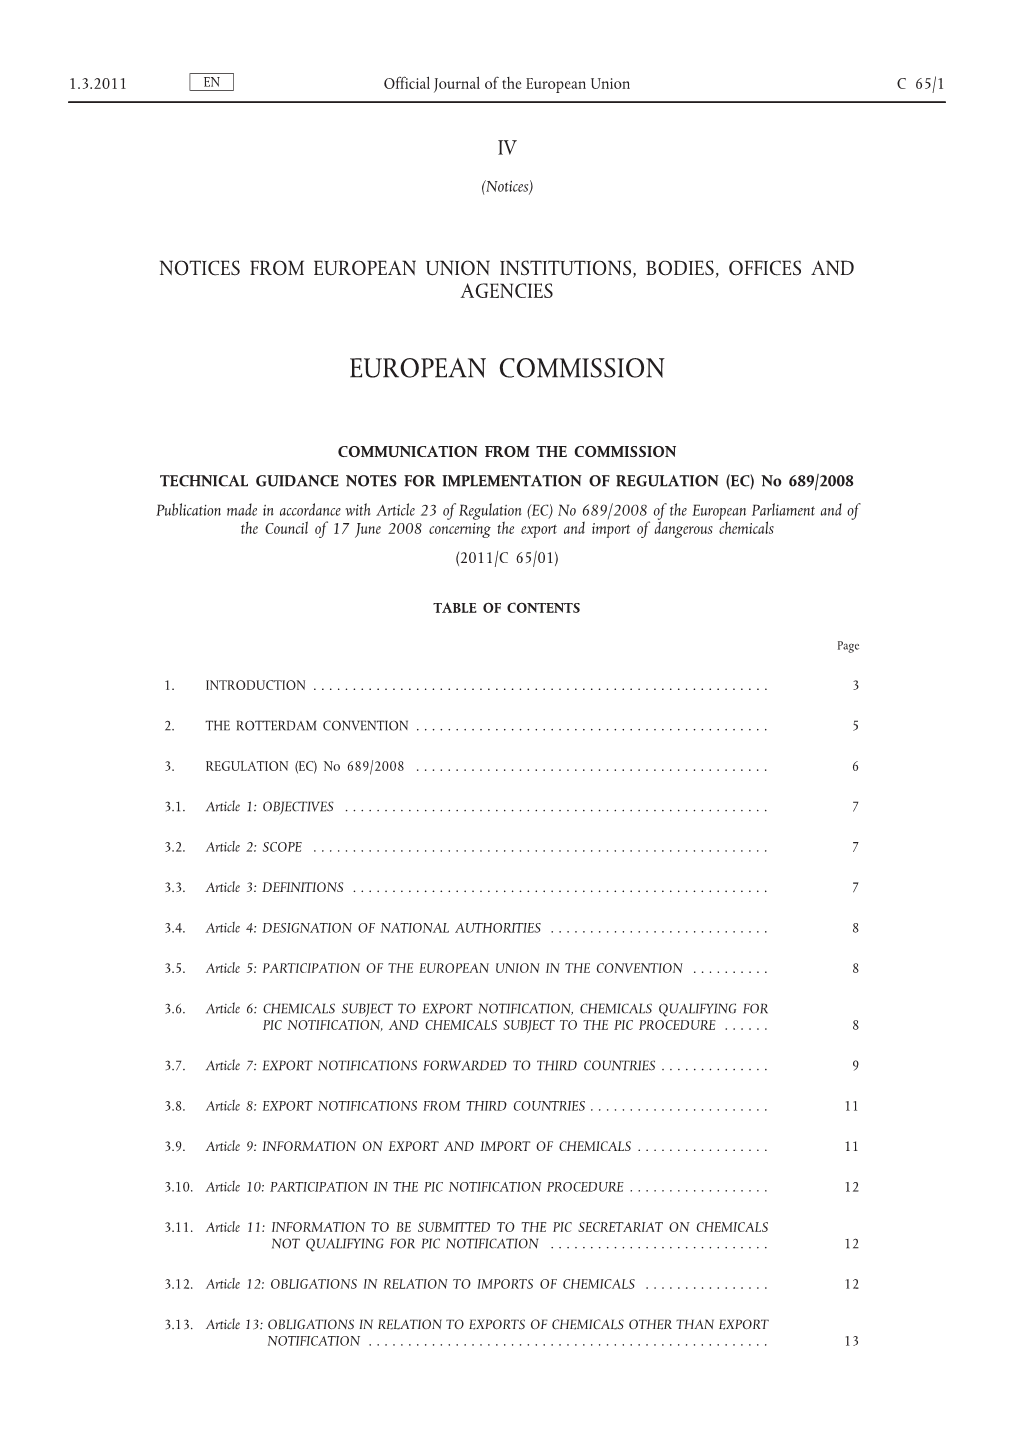 Technical Guidance Notes for Implementation of Regulation (EC)